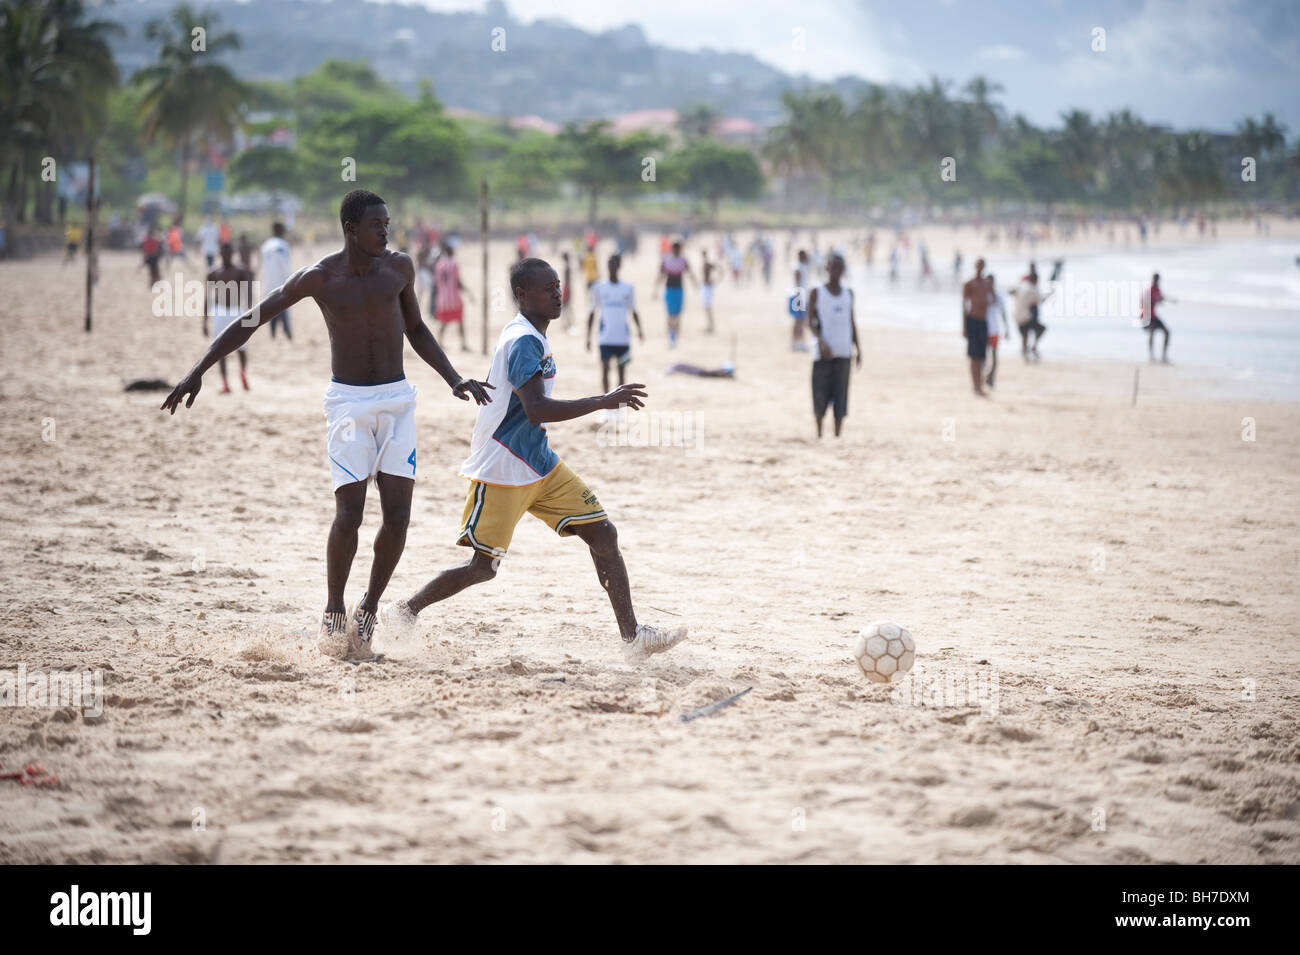 young men playing football on beach in sierra leone Stock Photo